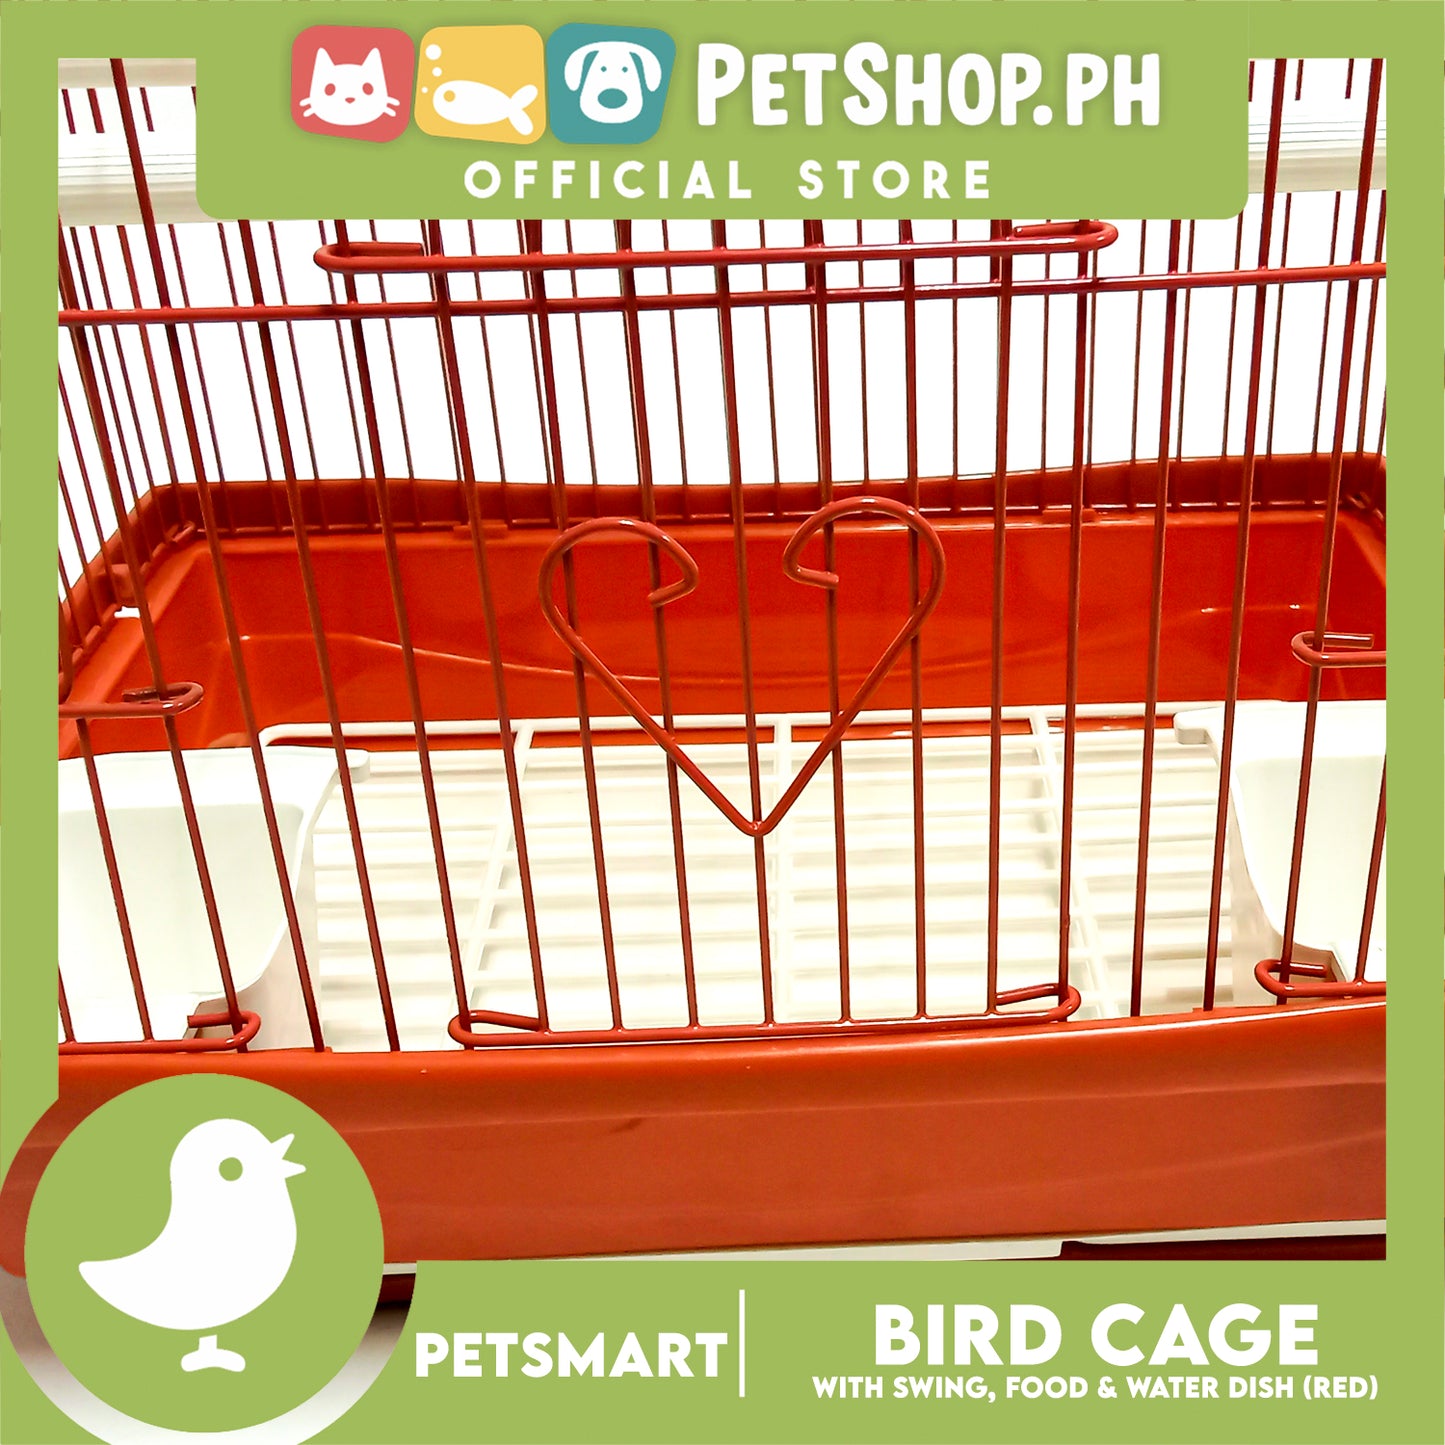 Bird Cage with Swing, Food and Water Dish (1001) Red Color, 30cm x 23cm x 40cm